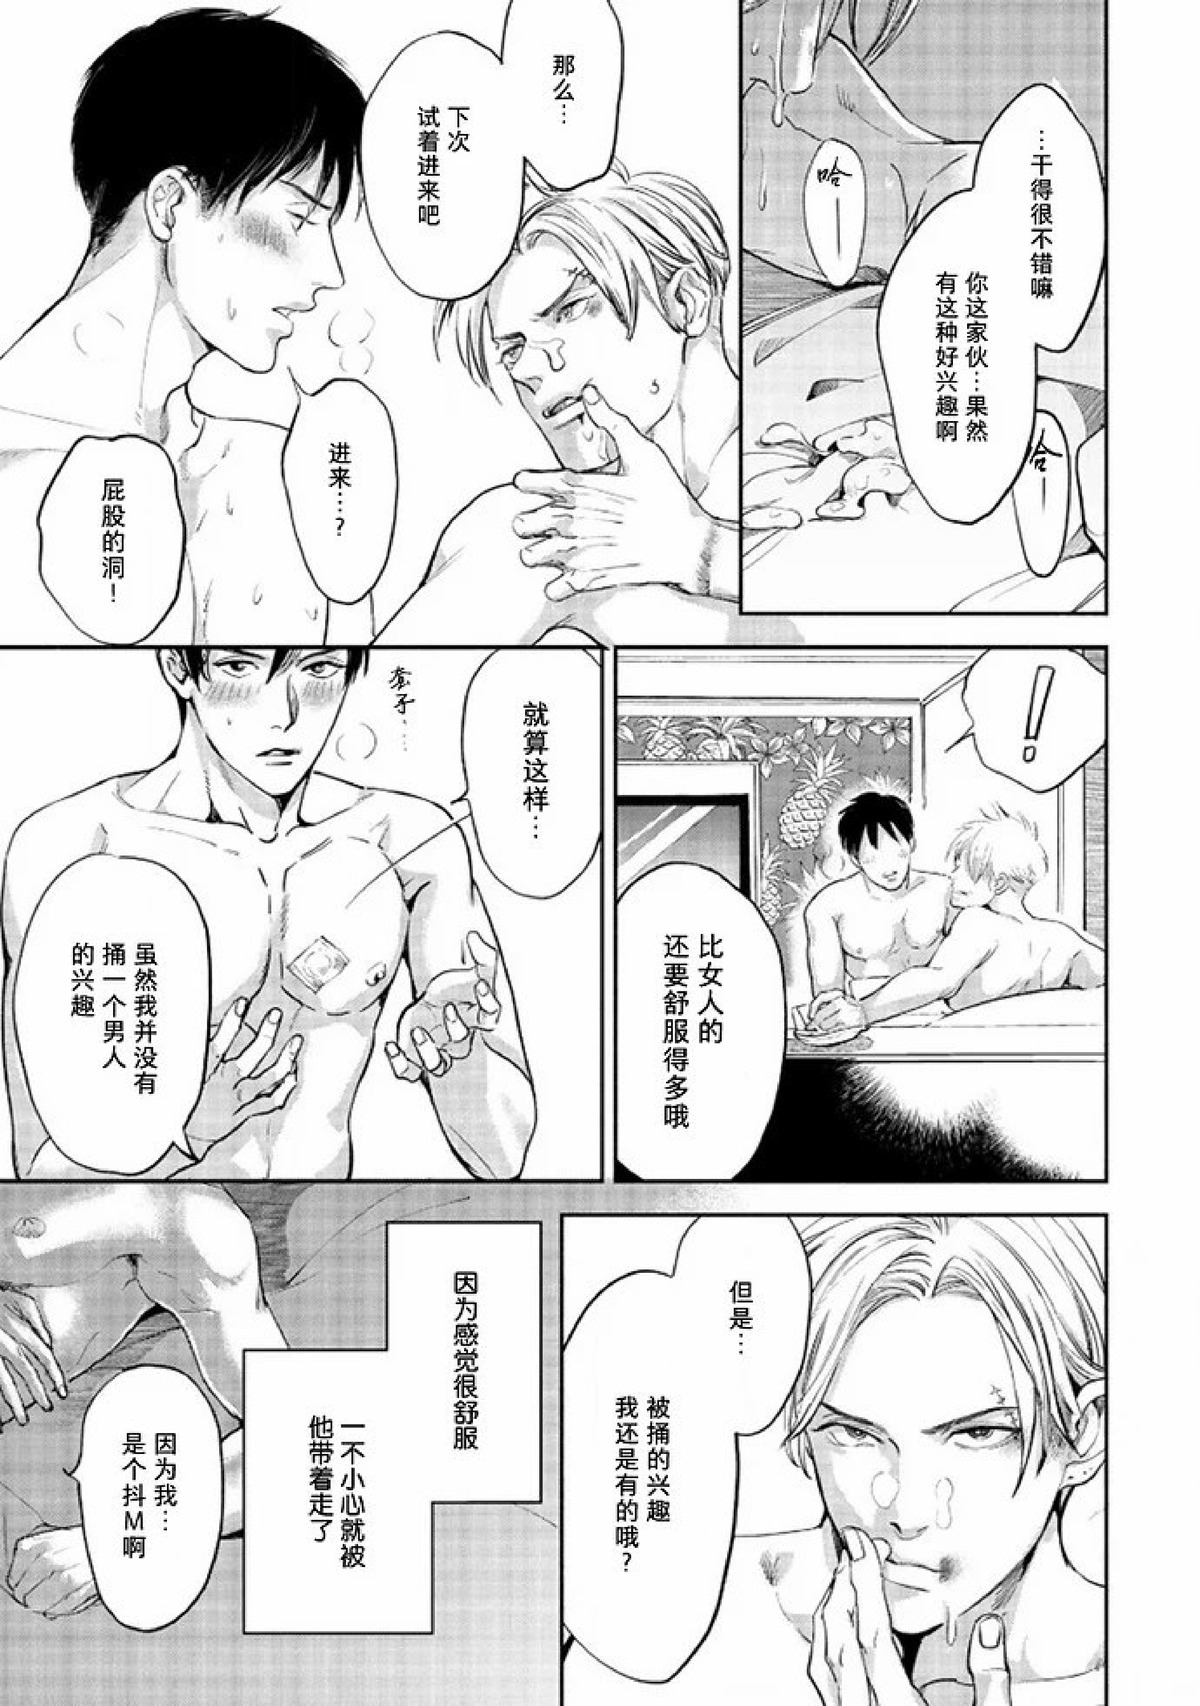 【Two sides of the same coin[腐漫]】漫画-（上卷01-02）章节漫画下拉式图片-97.jpg